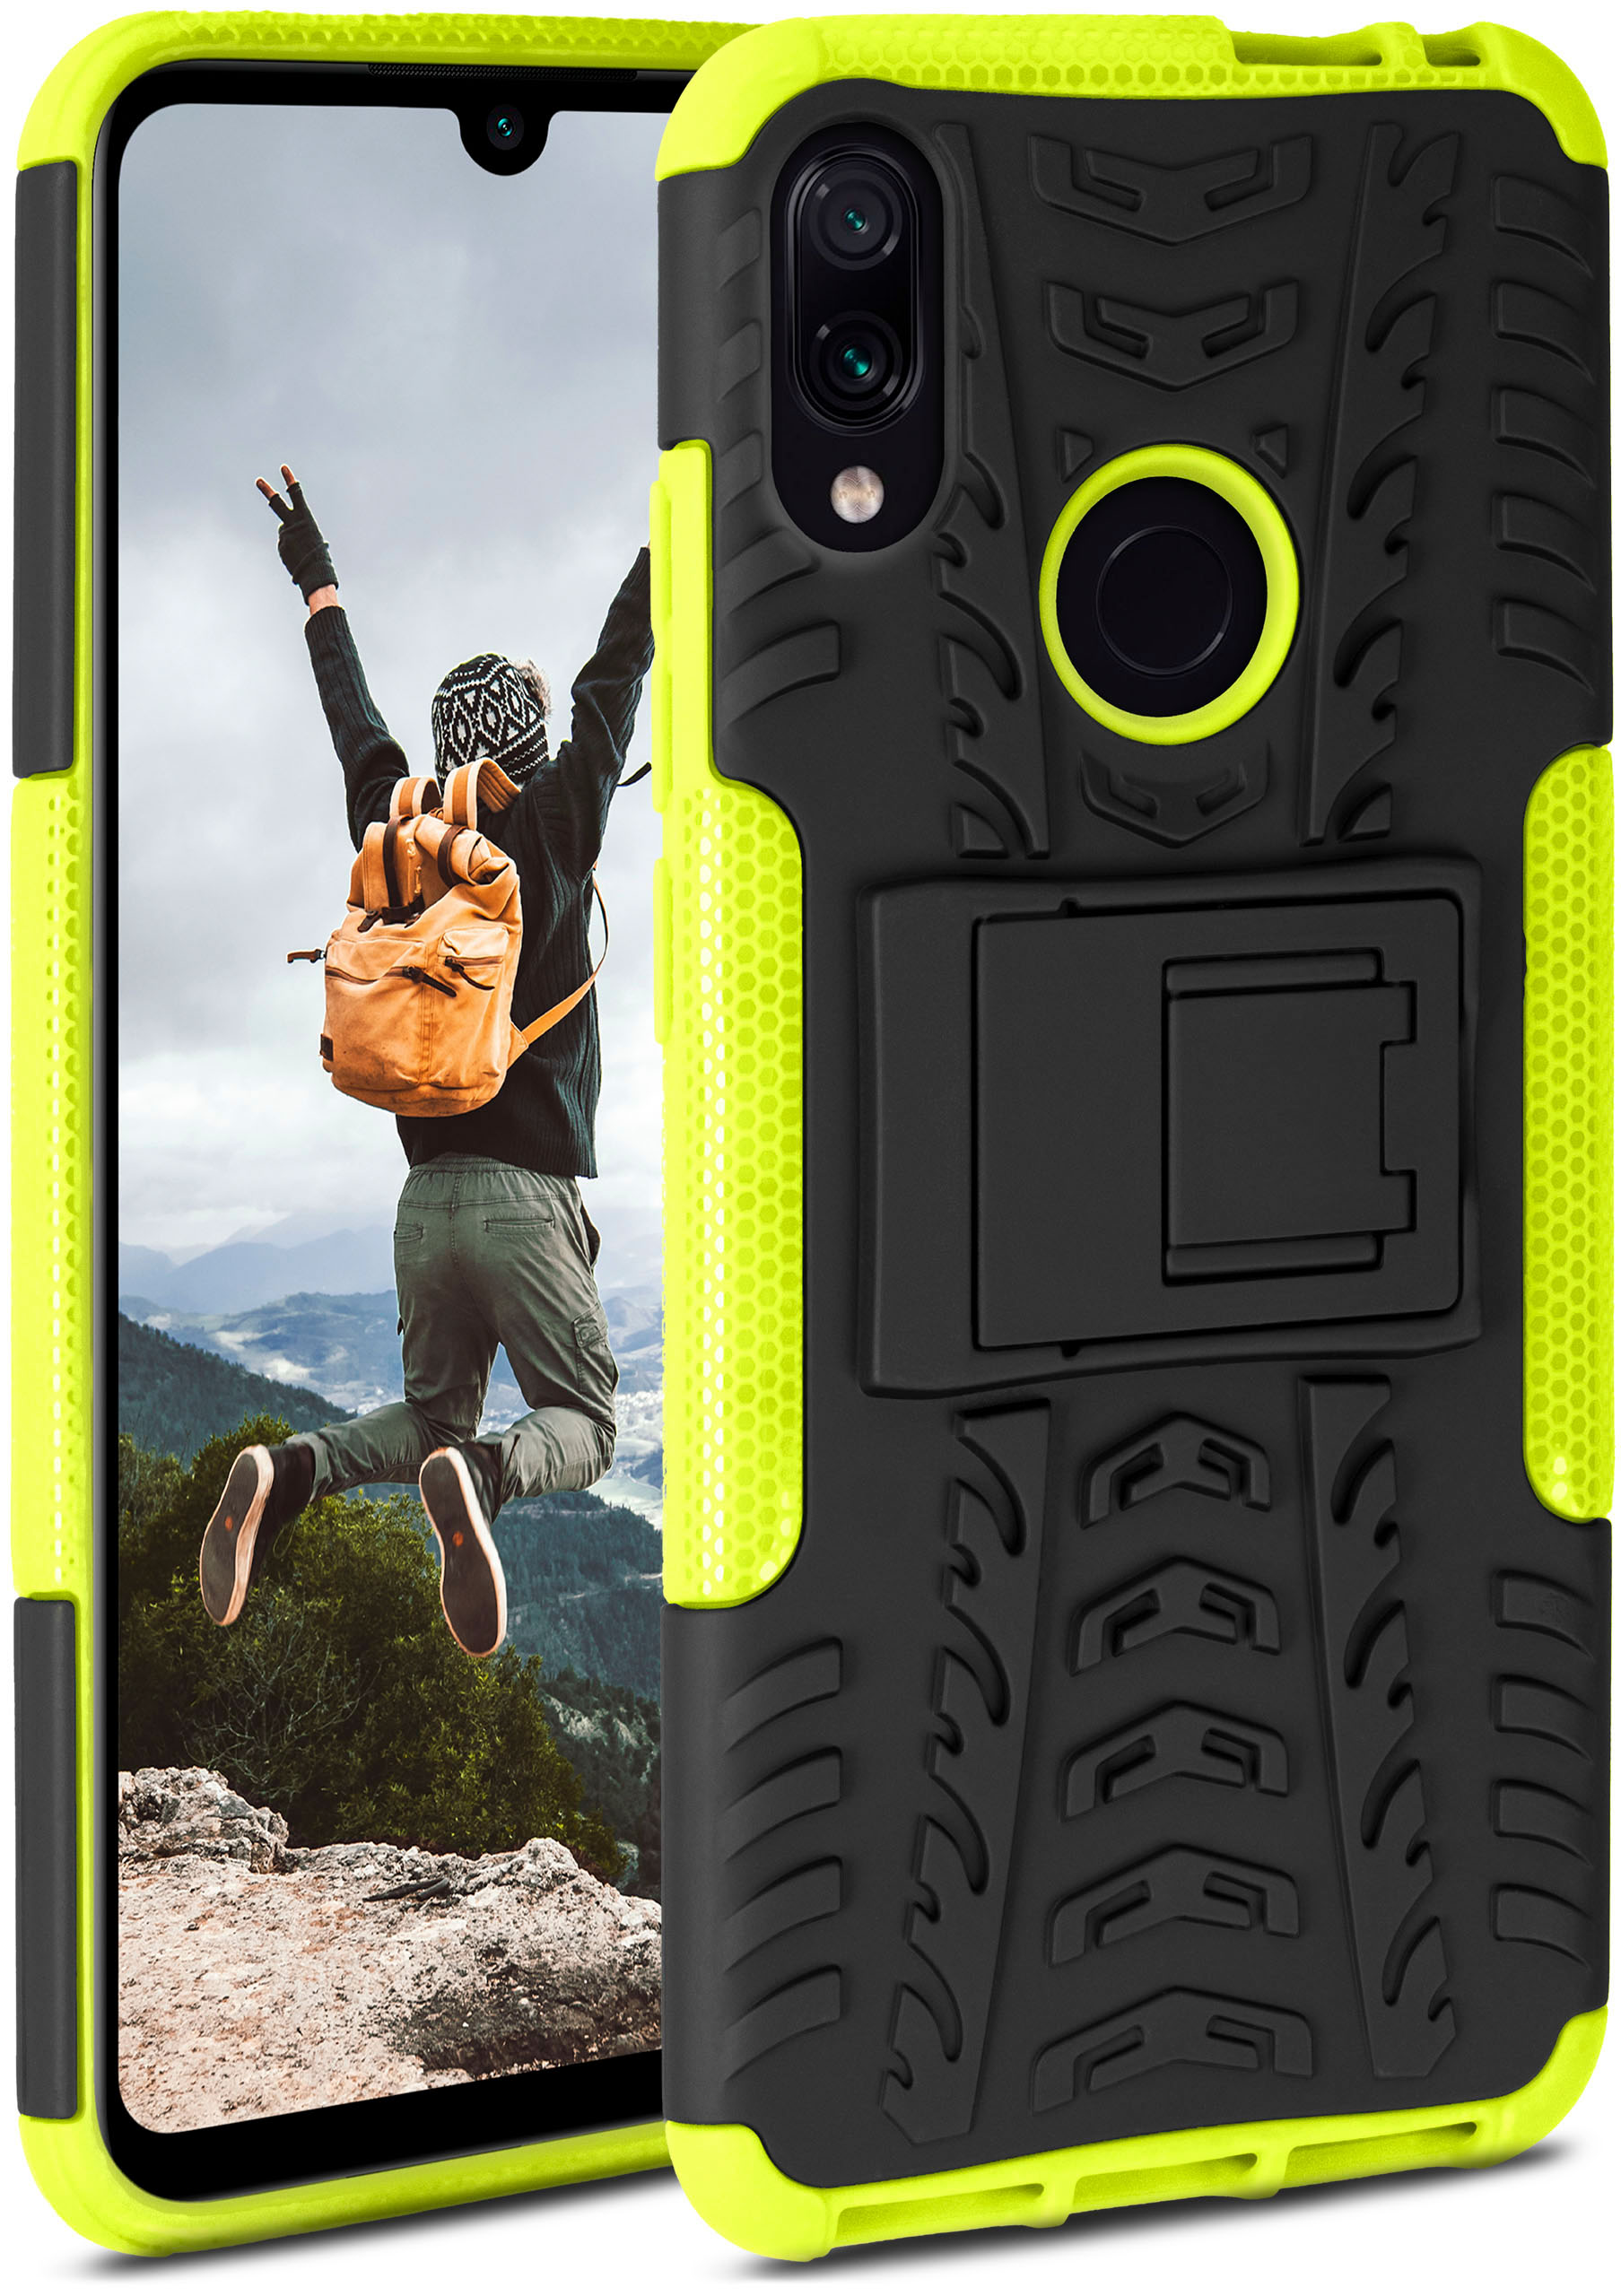 / Note 7 Backcover, Tank Lime ONEFLOW Pro Case, Xiaomi, Redmi 7/ Note 7S,